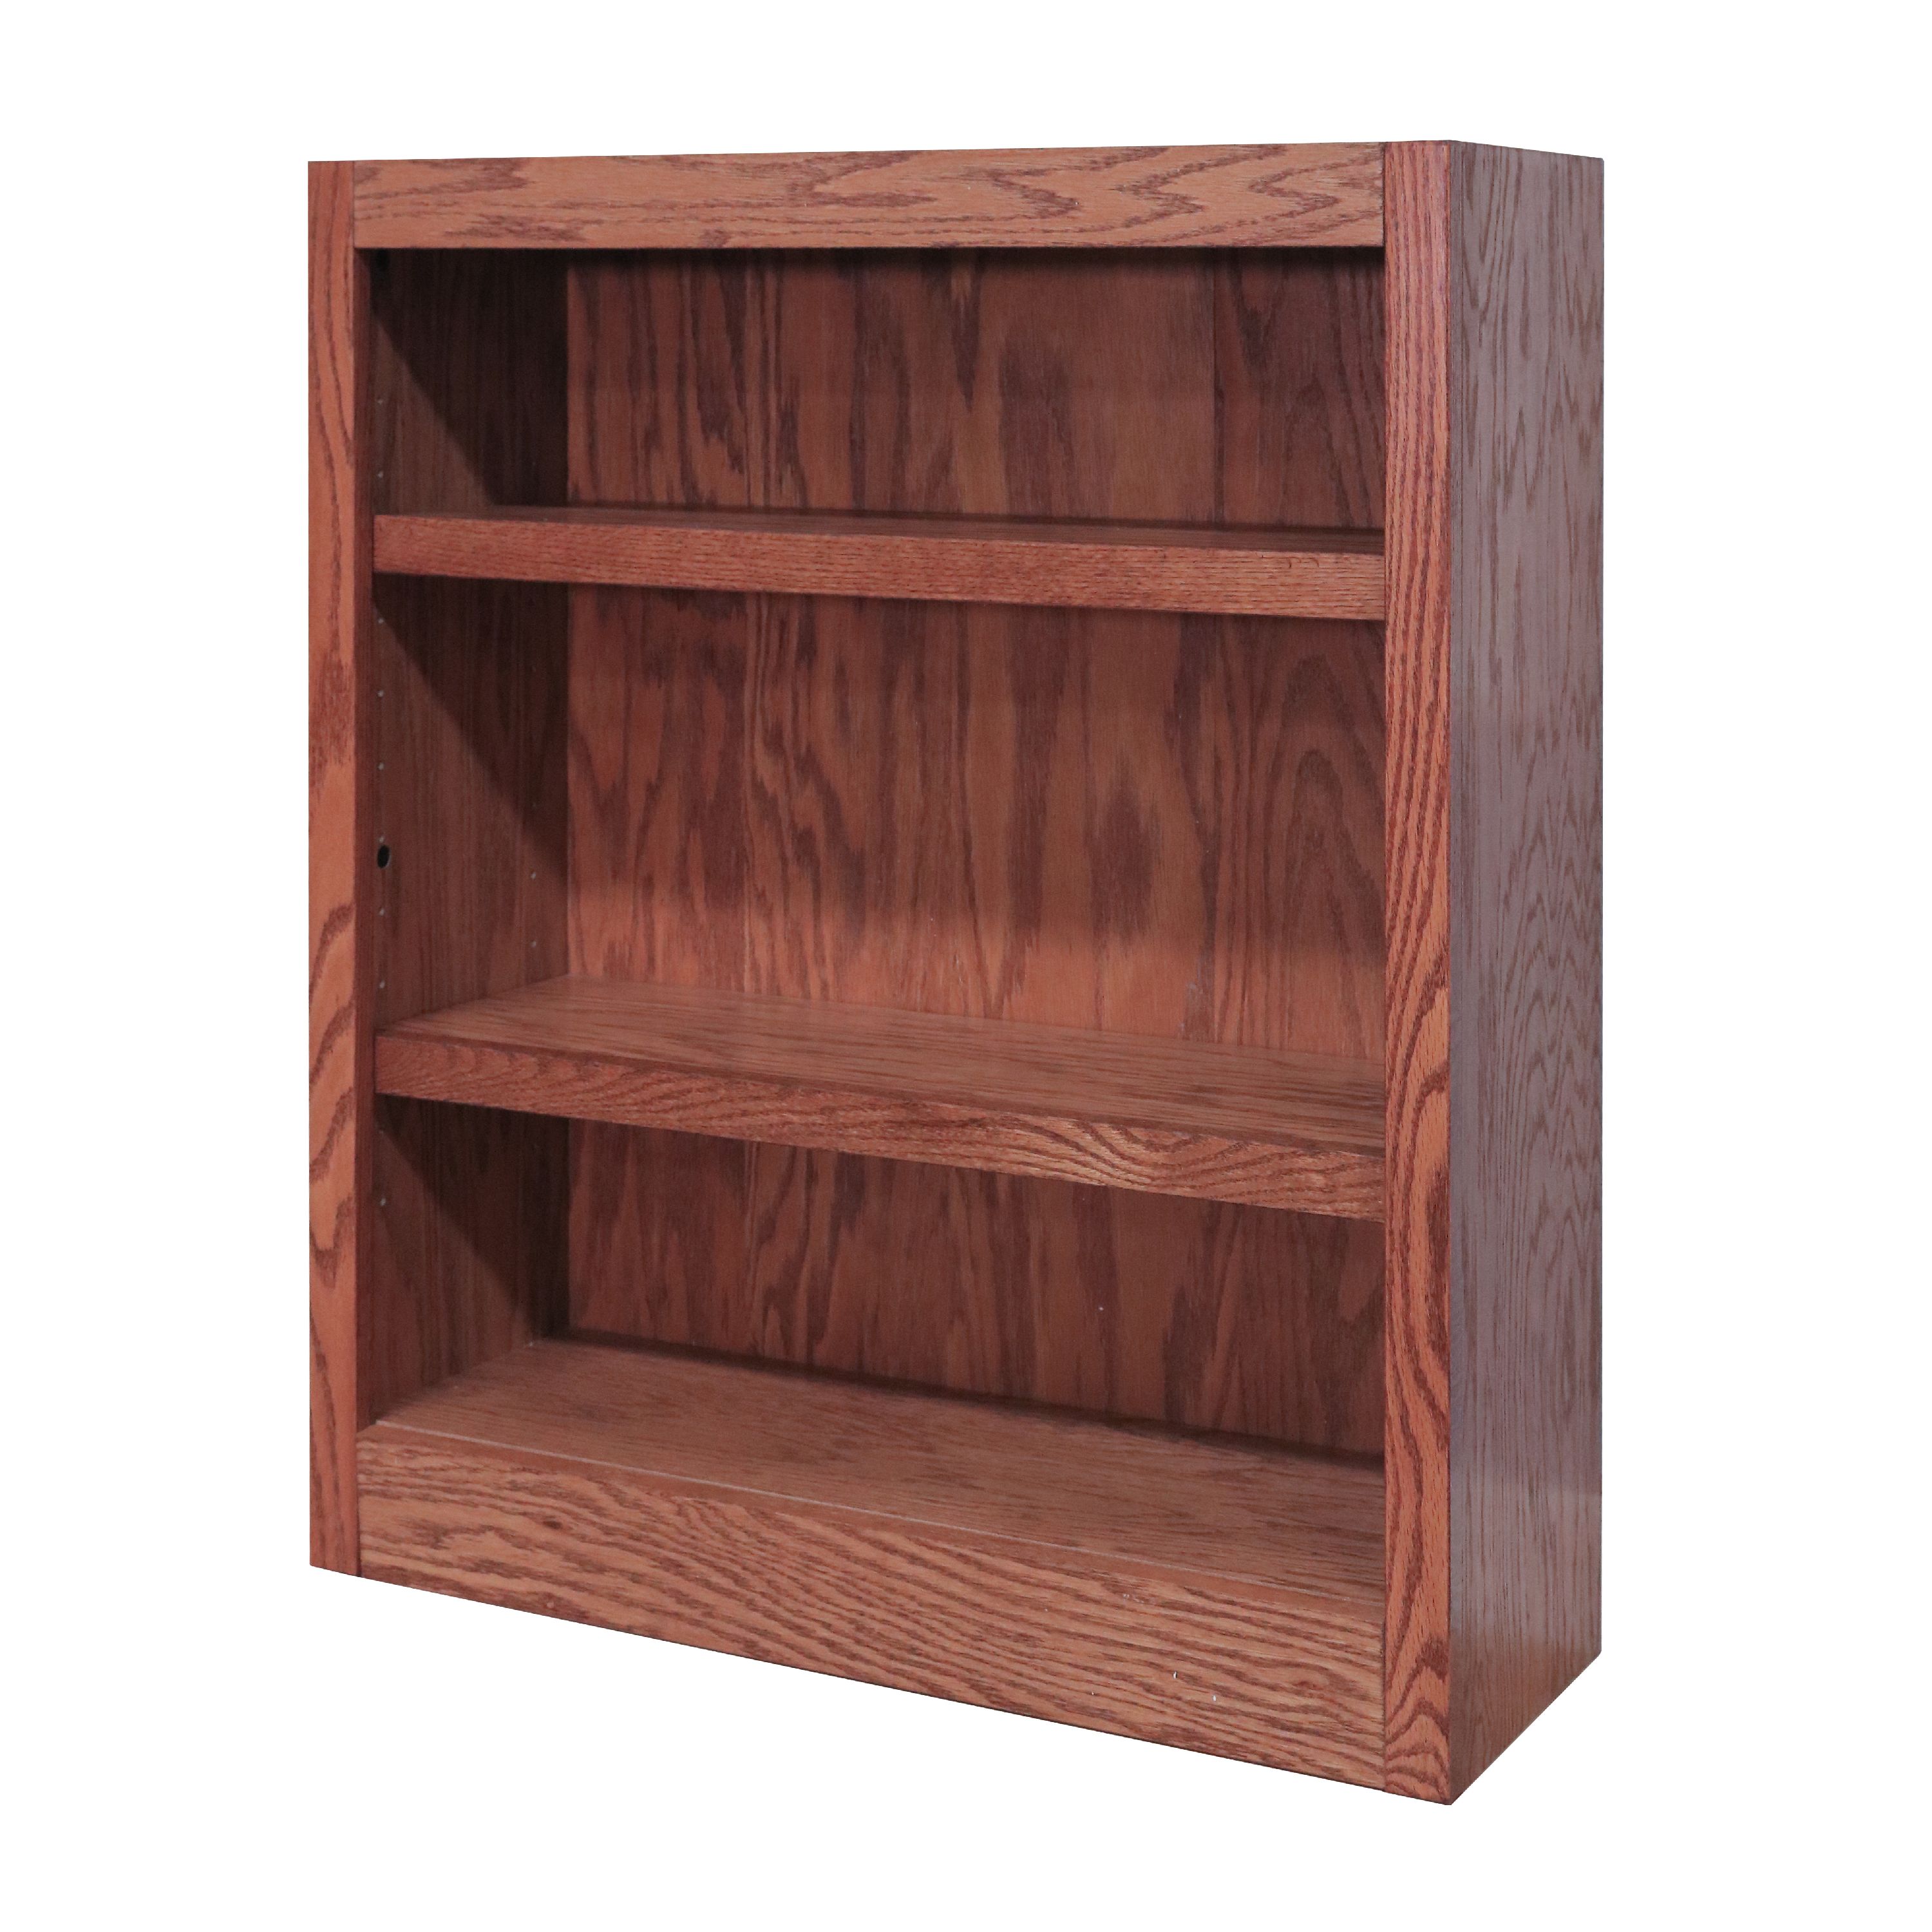 Concepts in Wood 3 Shelf Wood Bookcase, 36 inch Tall - Oak Finish - image 1 of 6